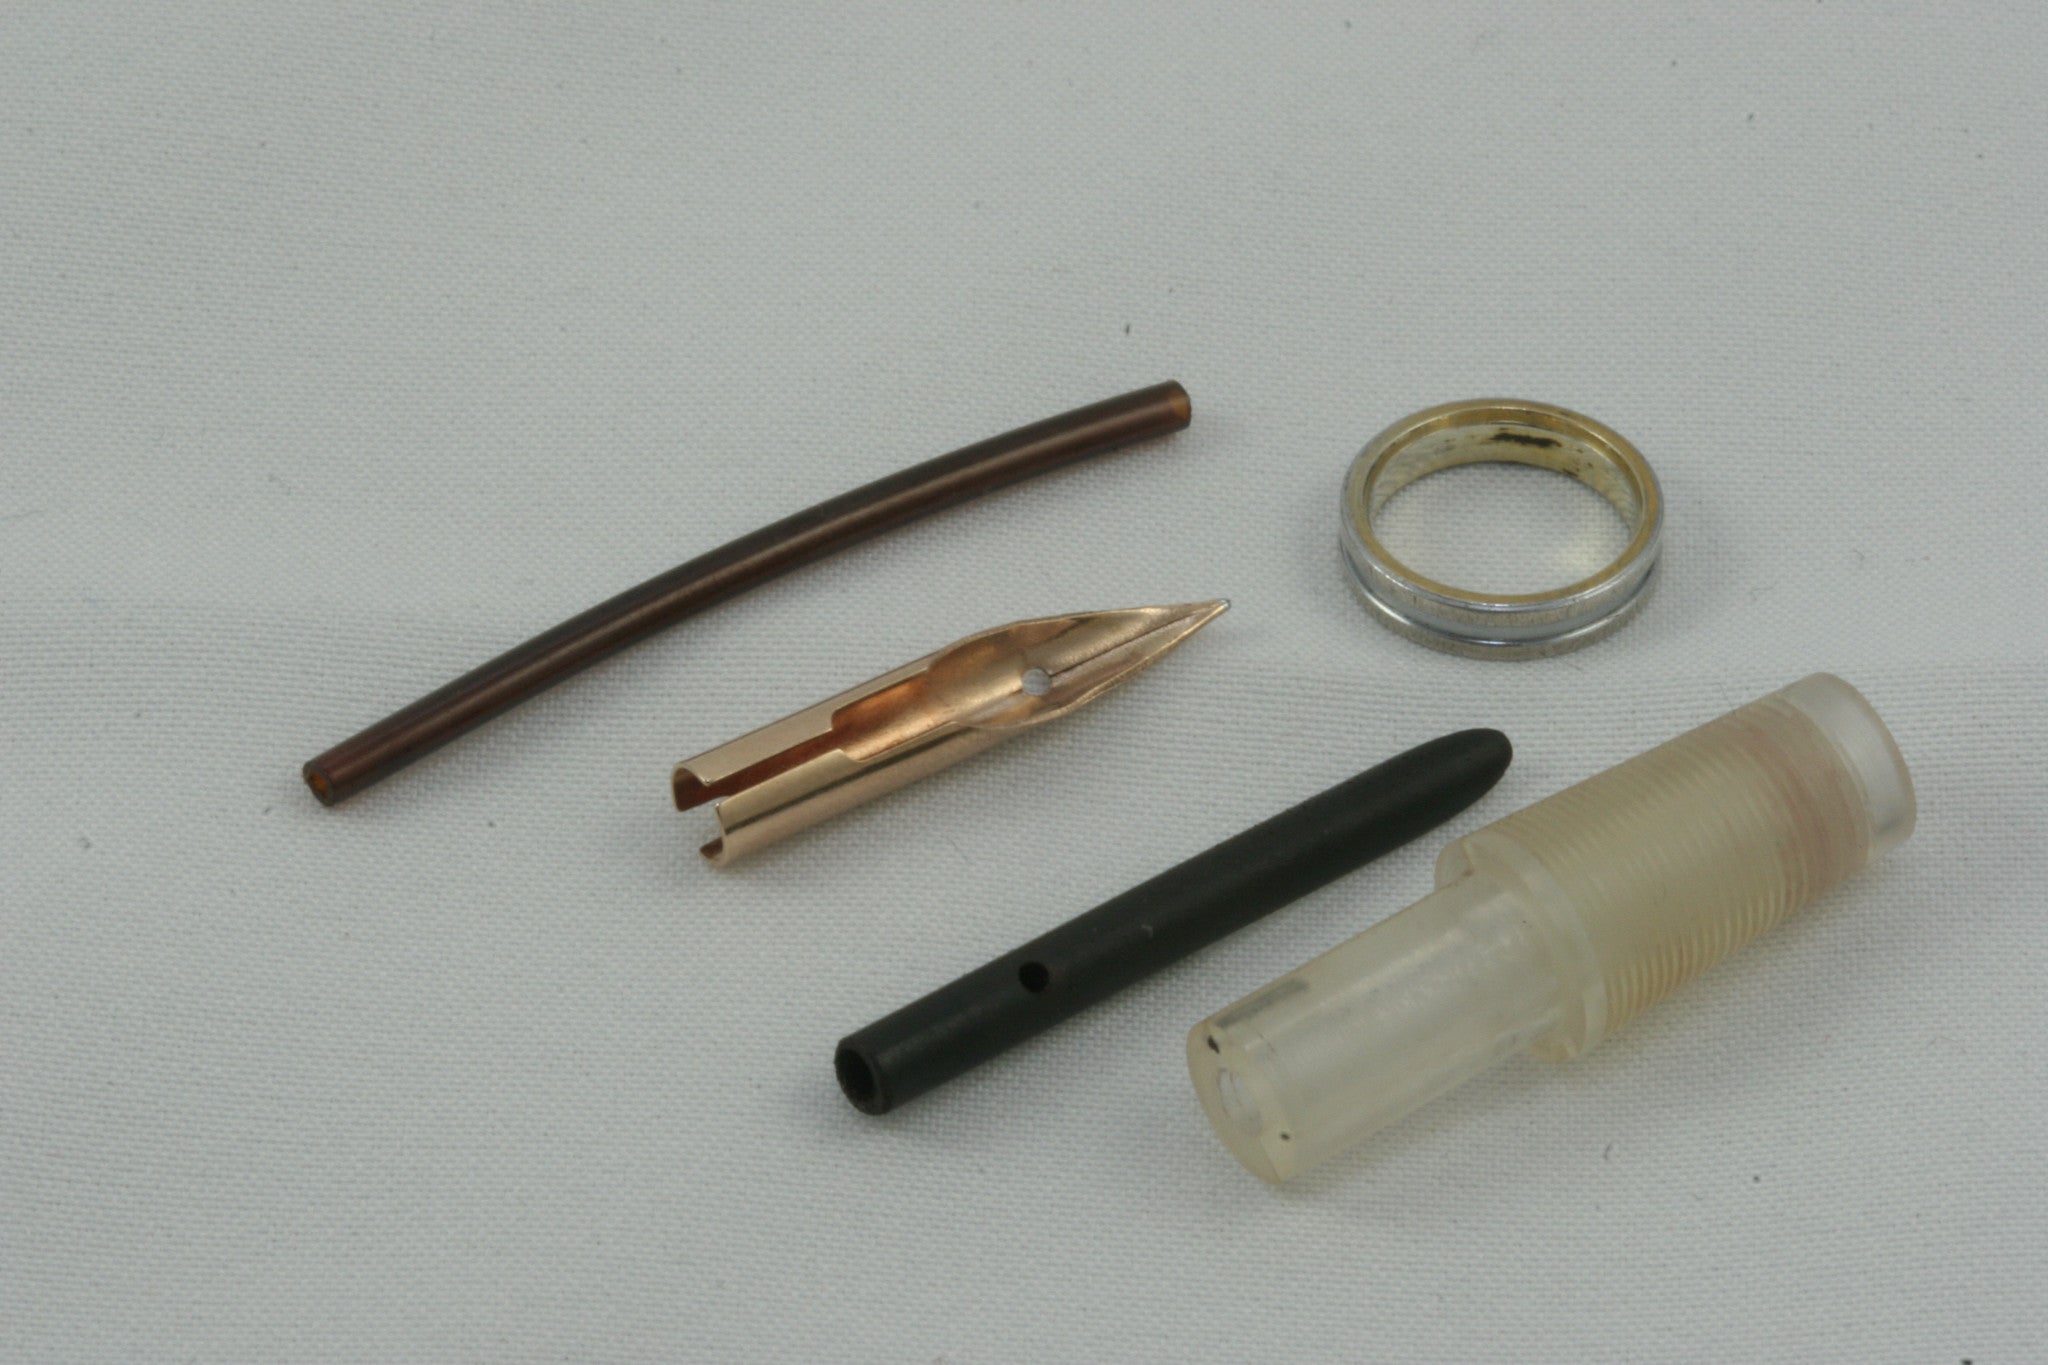 Parker 51 Vacumatic Black - Gold Filled Cap - Fully Restored And Working